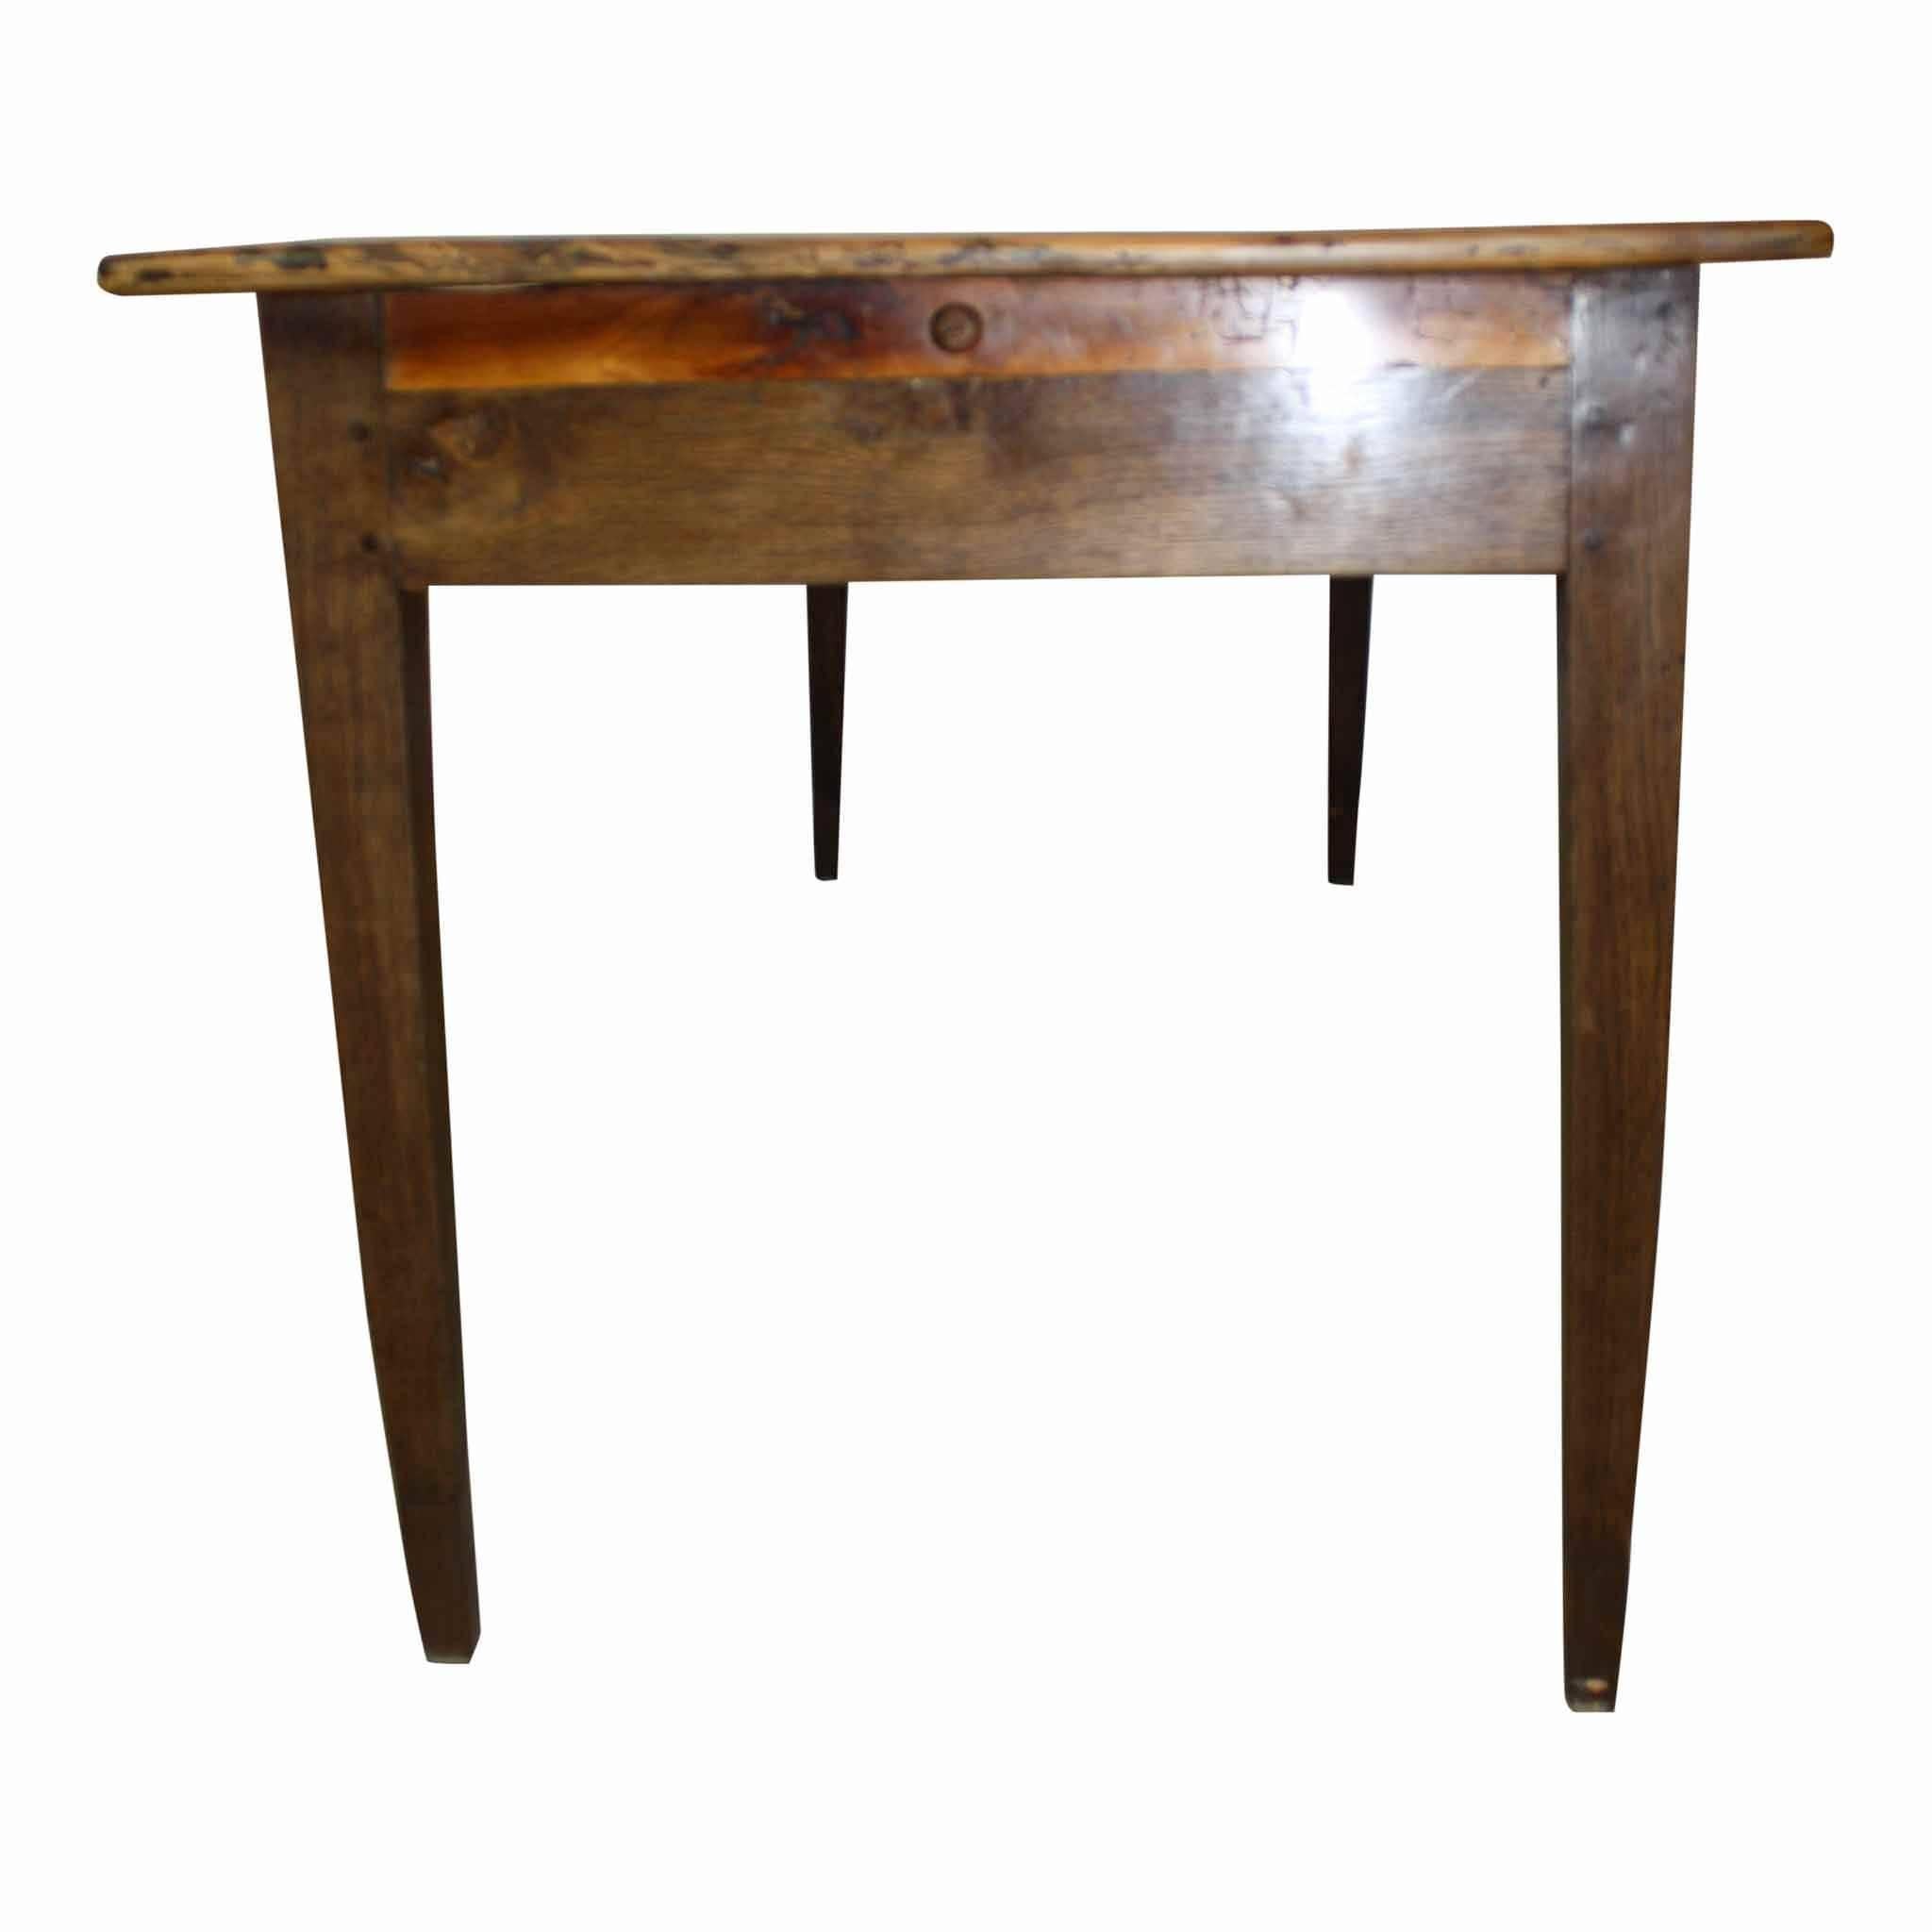 19th Century French Cherry and Oak Farm Table with Drawer, circa 1850